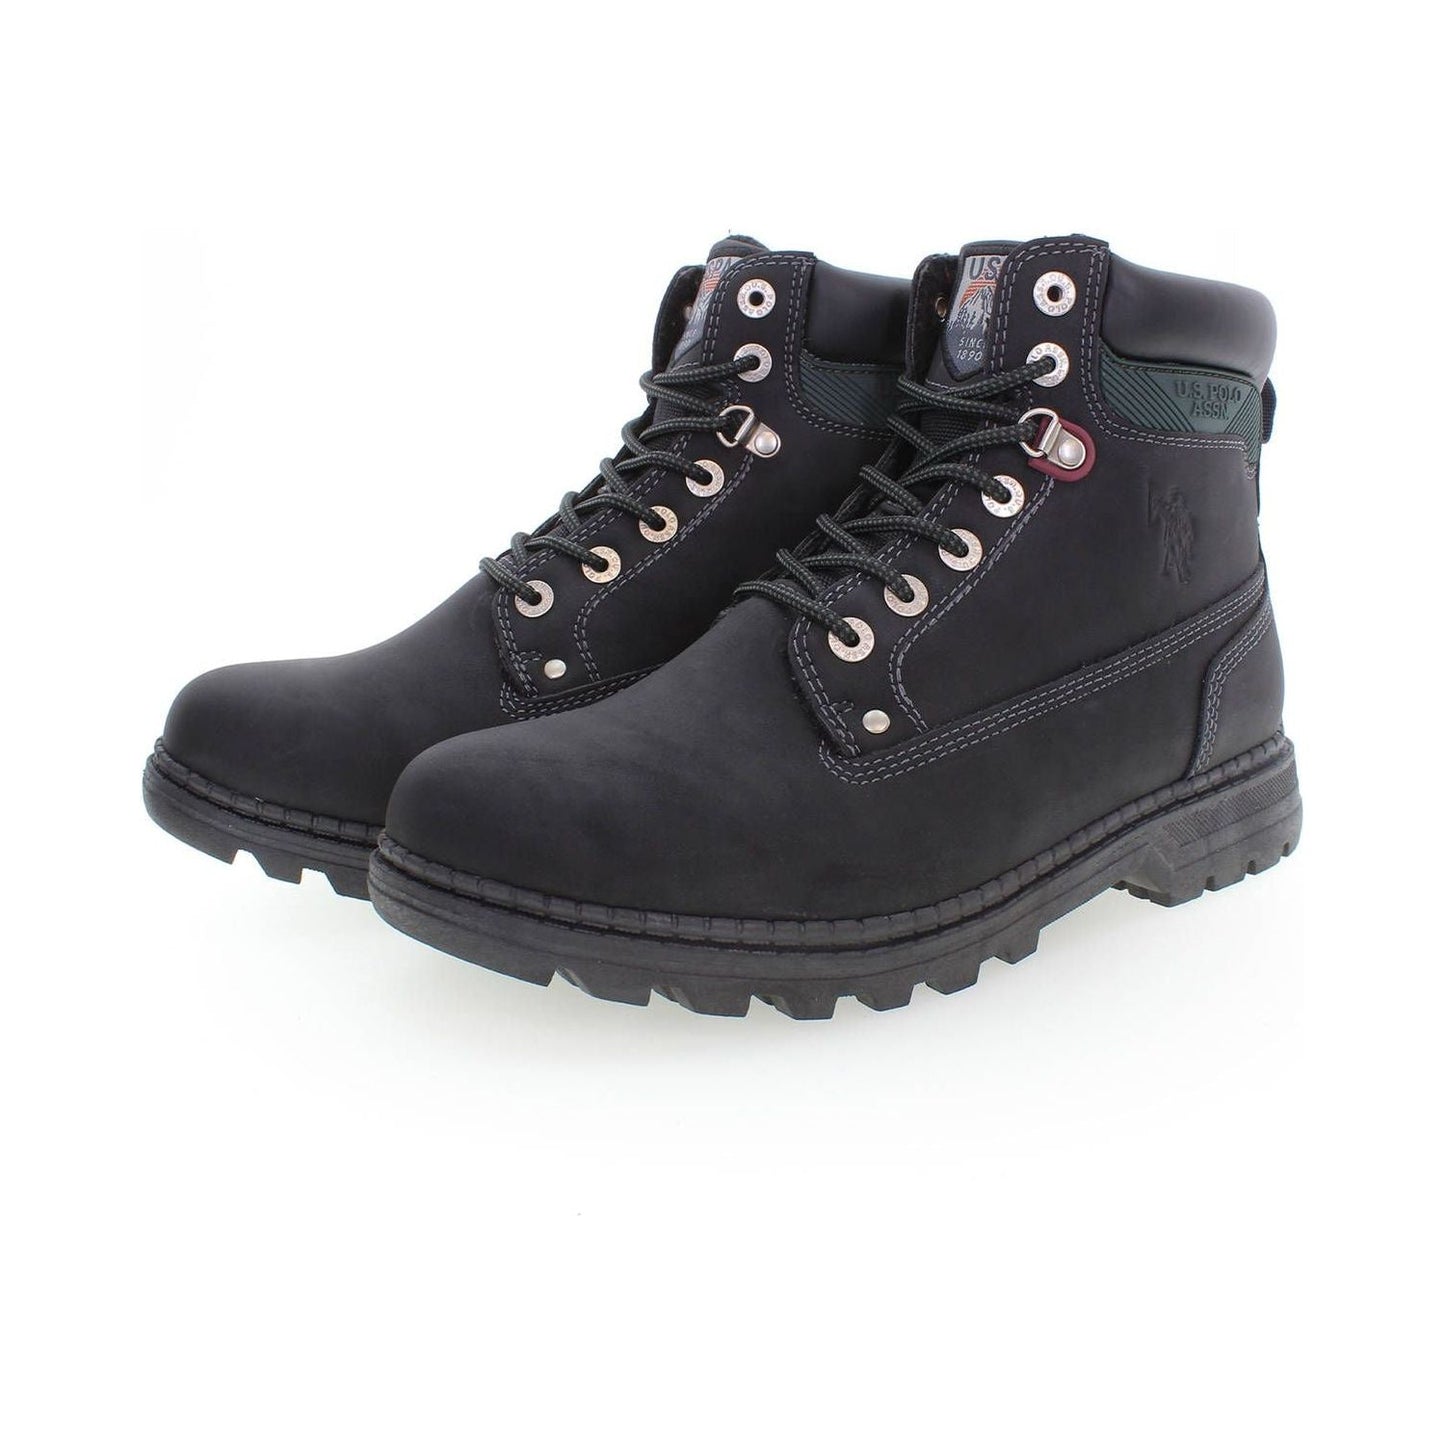 U.S. POLO ASSN. Equestrian Chic Lace-Up High Boots equestrian-chic-lace-up-high-boots